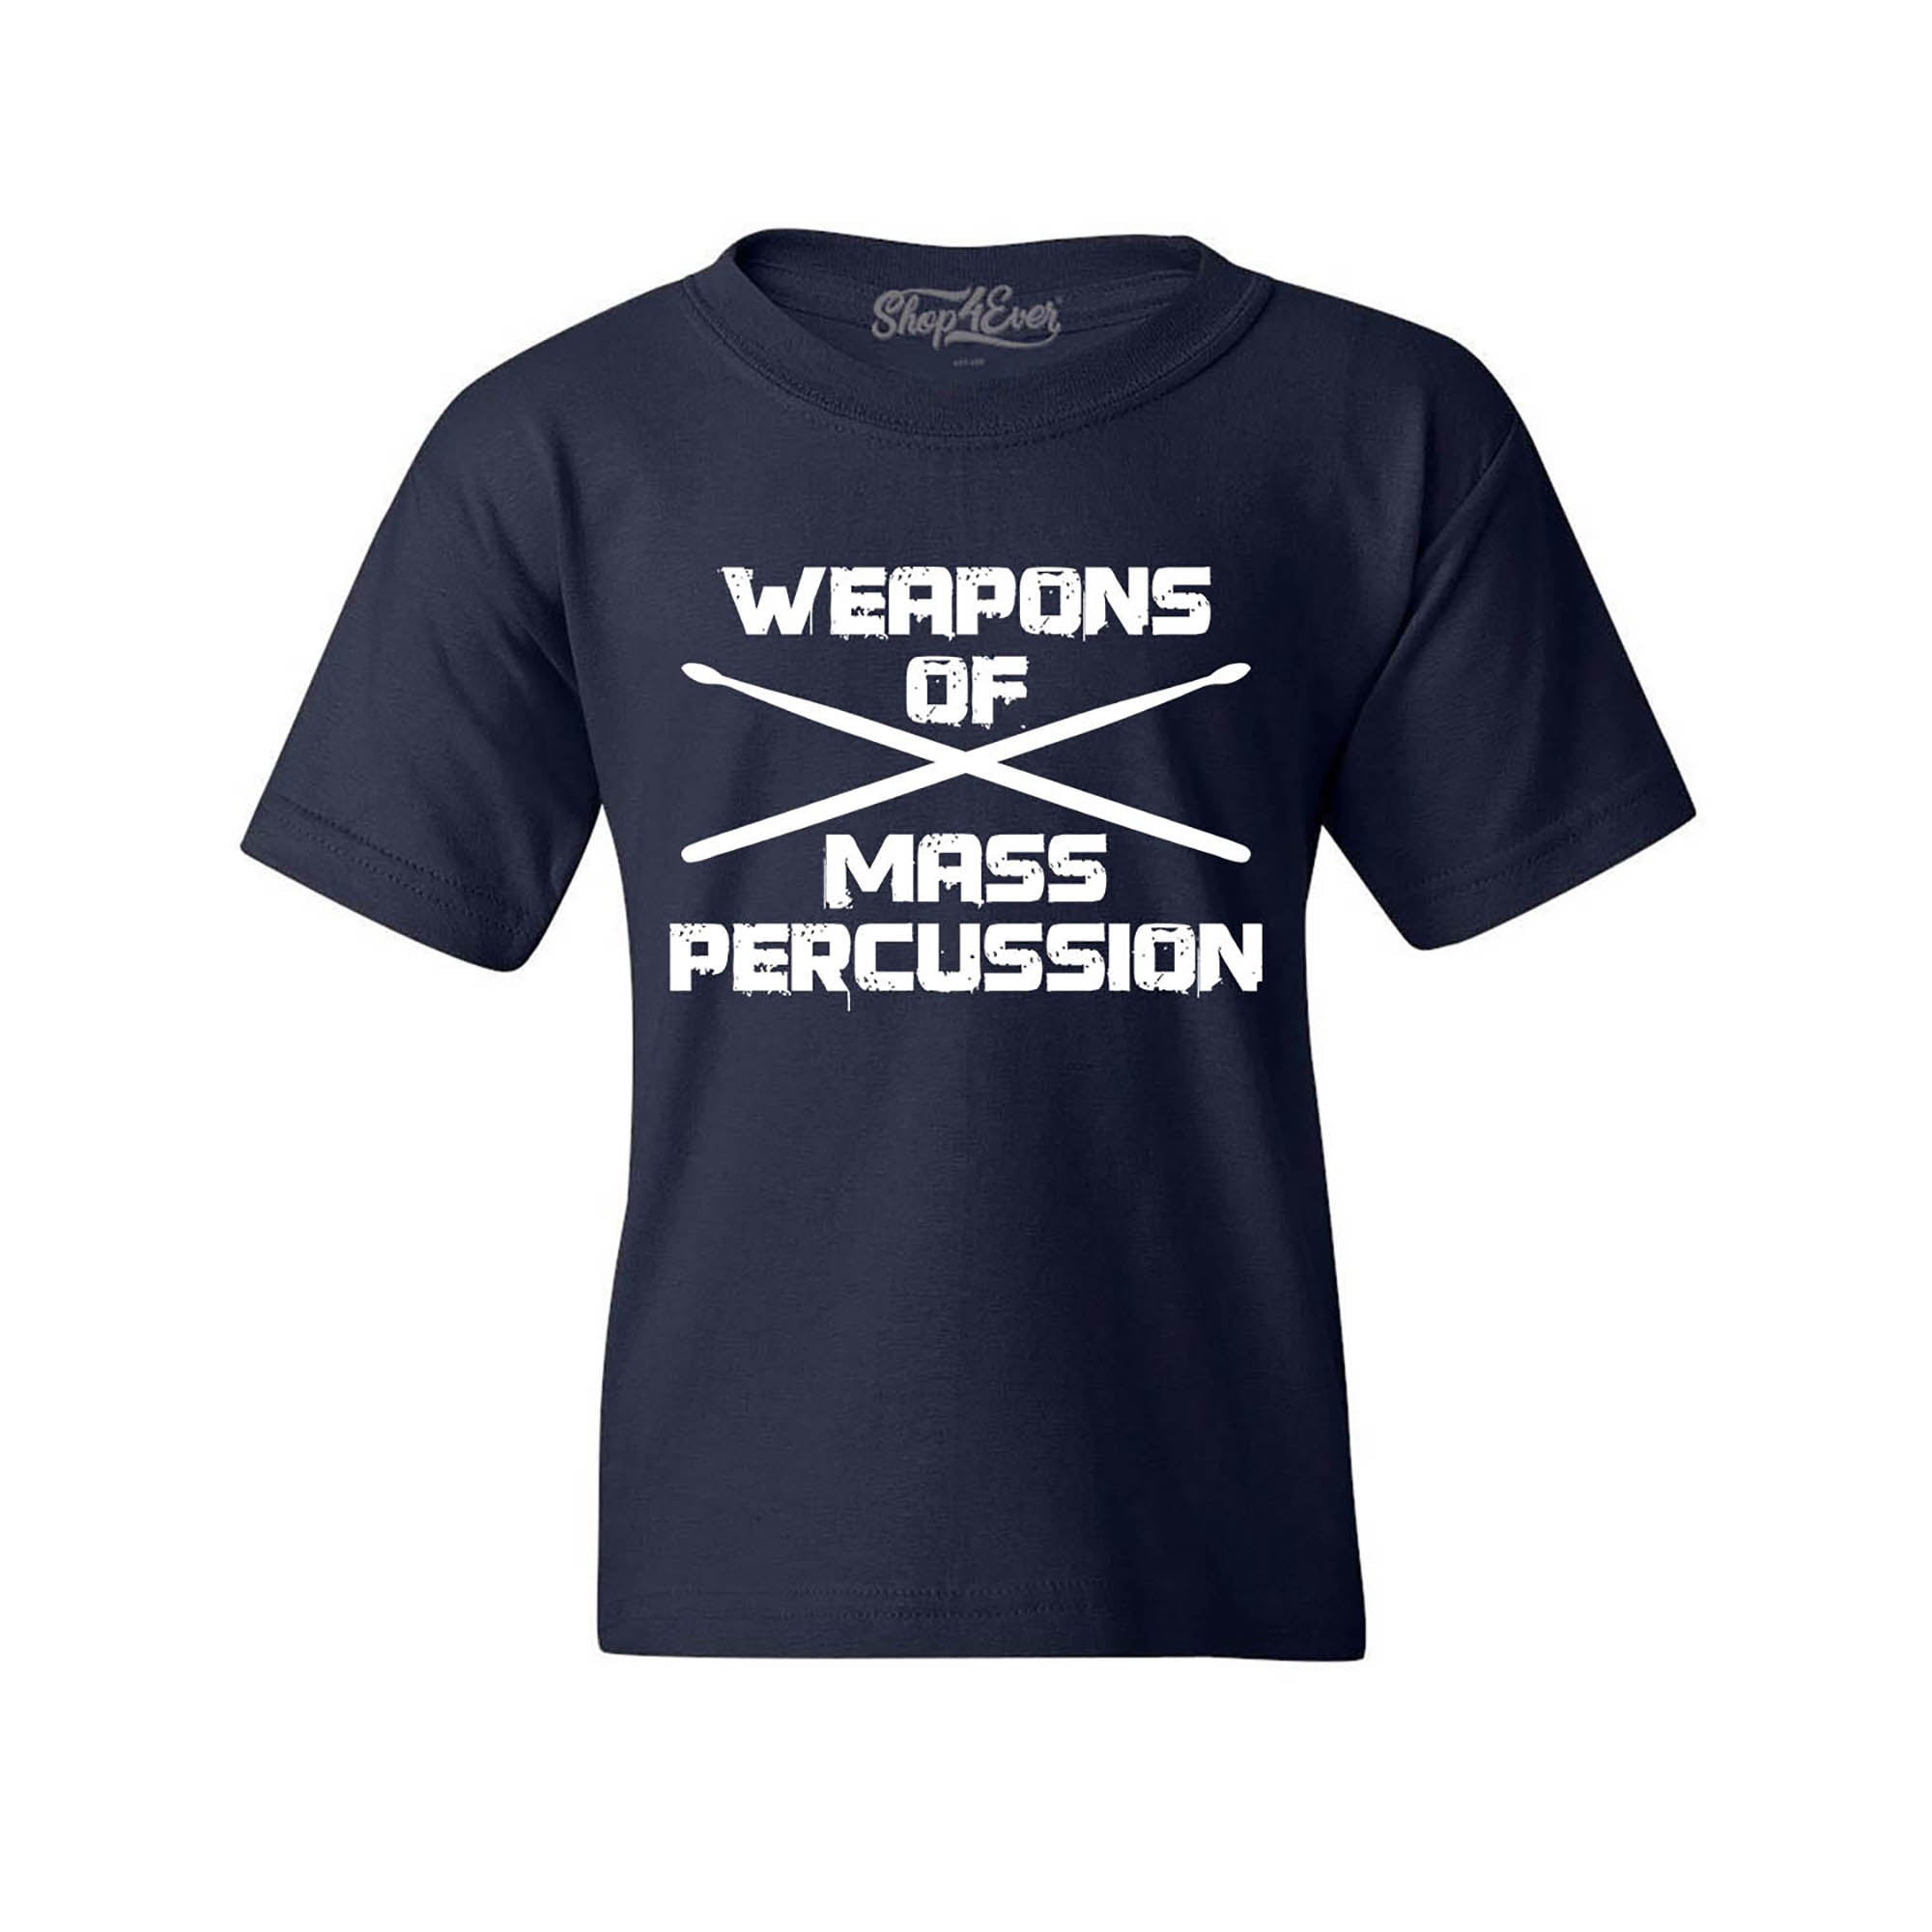 Weapons of Mass Percussion Drumsticks Drummer Youth's T-Shirt